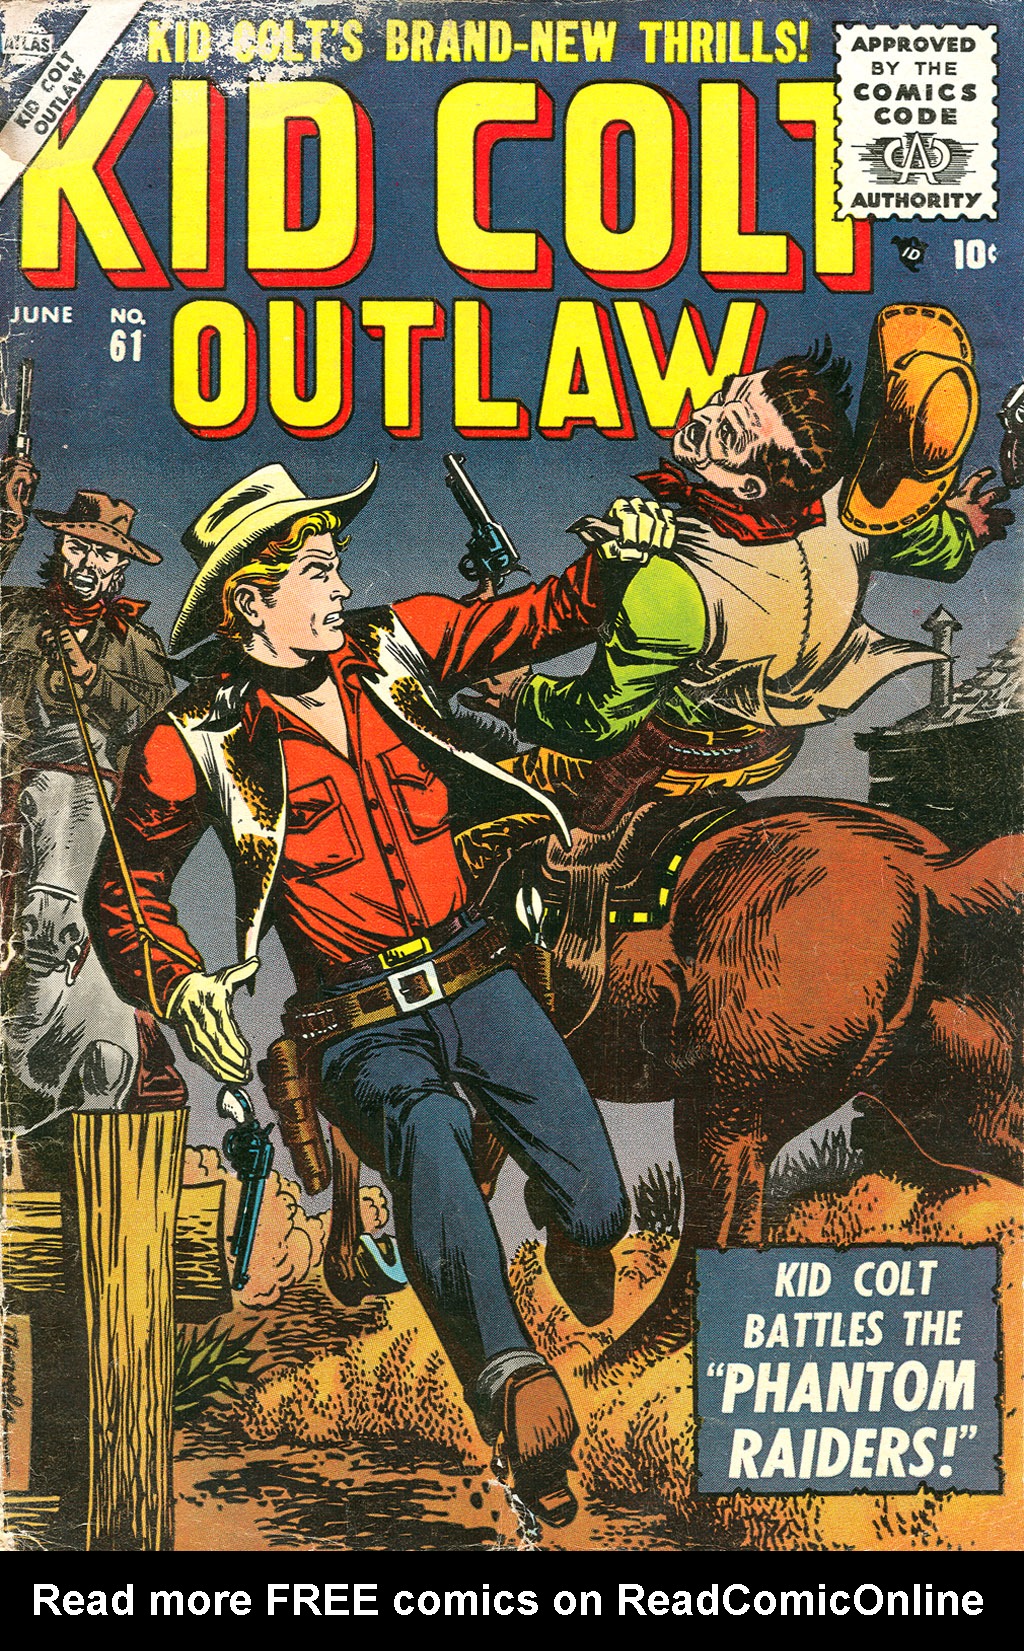 Read online Kid Colt Outlaw comic -  Issue #61 - 1